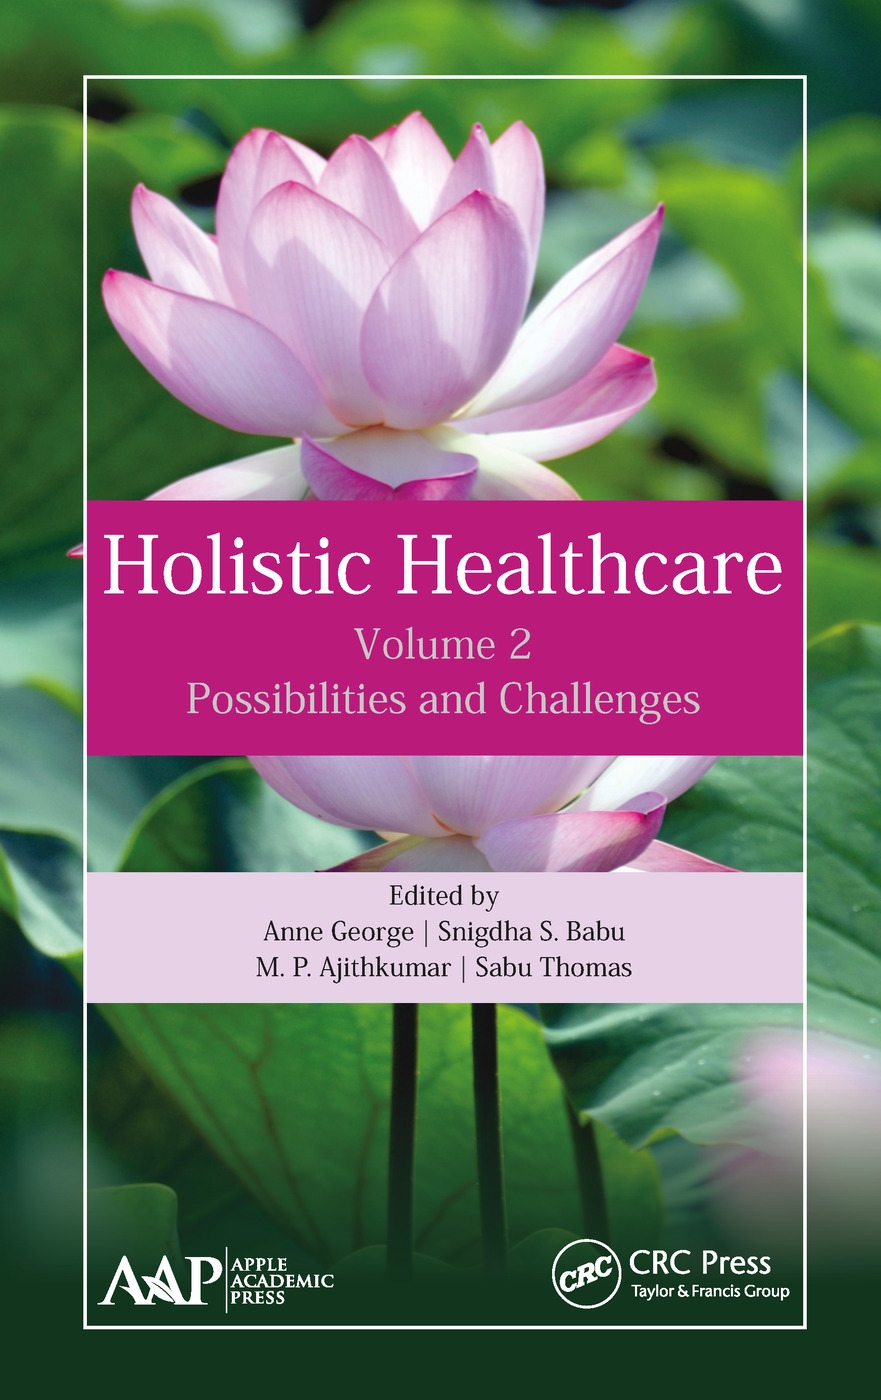 Holistic Healthcare: Possibilities and Challenges